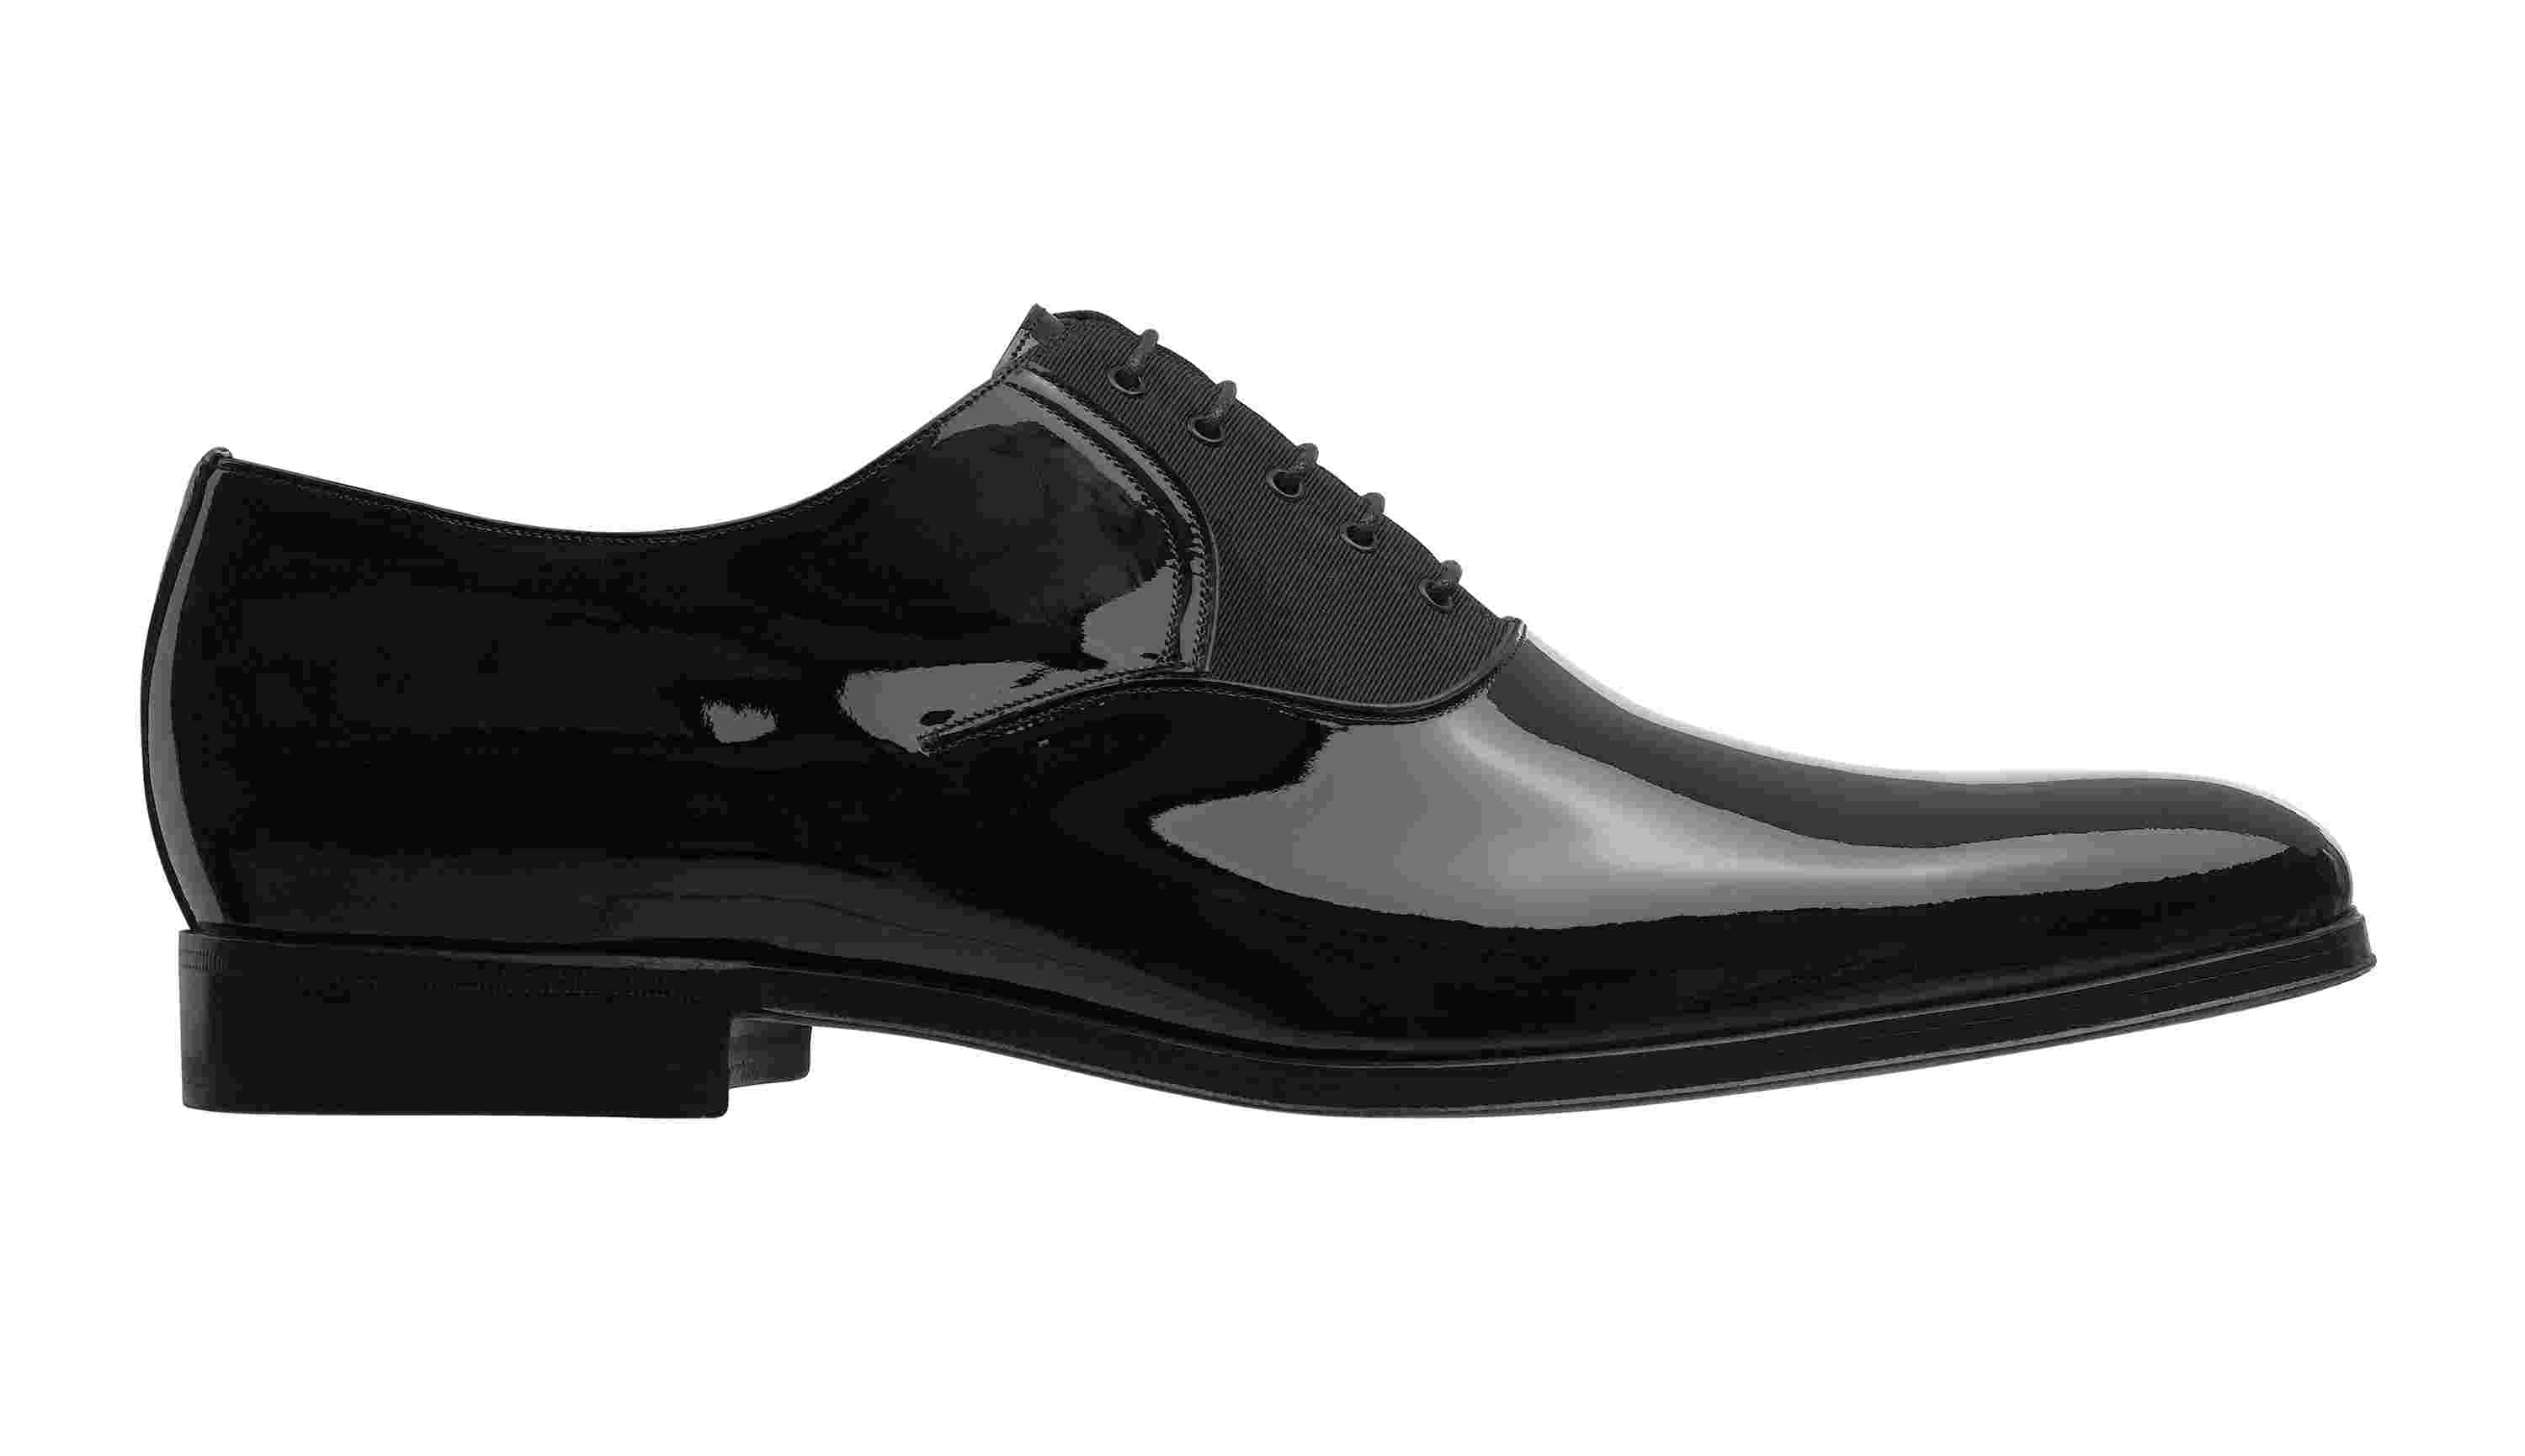 Oxfordshoe in Black Patent Calfskin and Ottoman Canvas